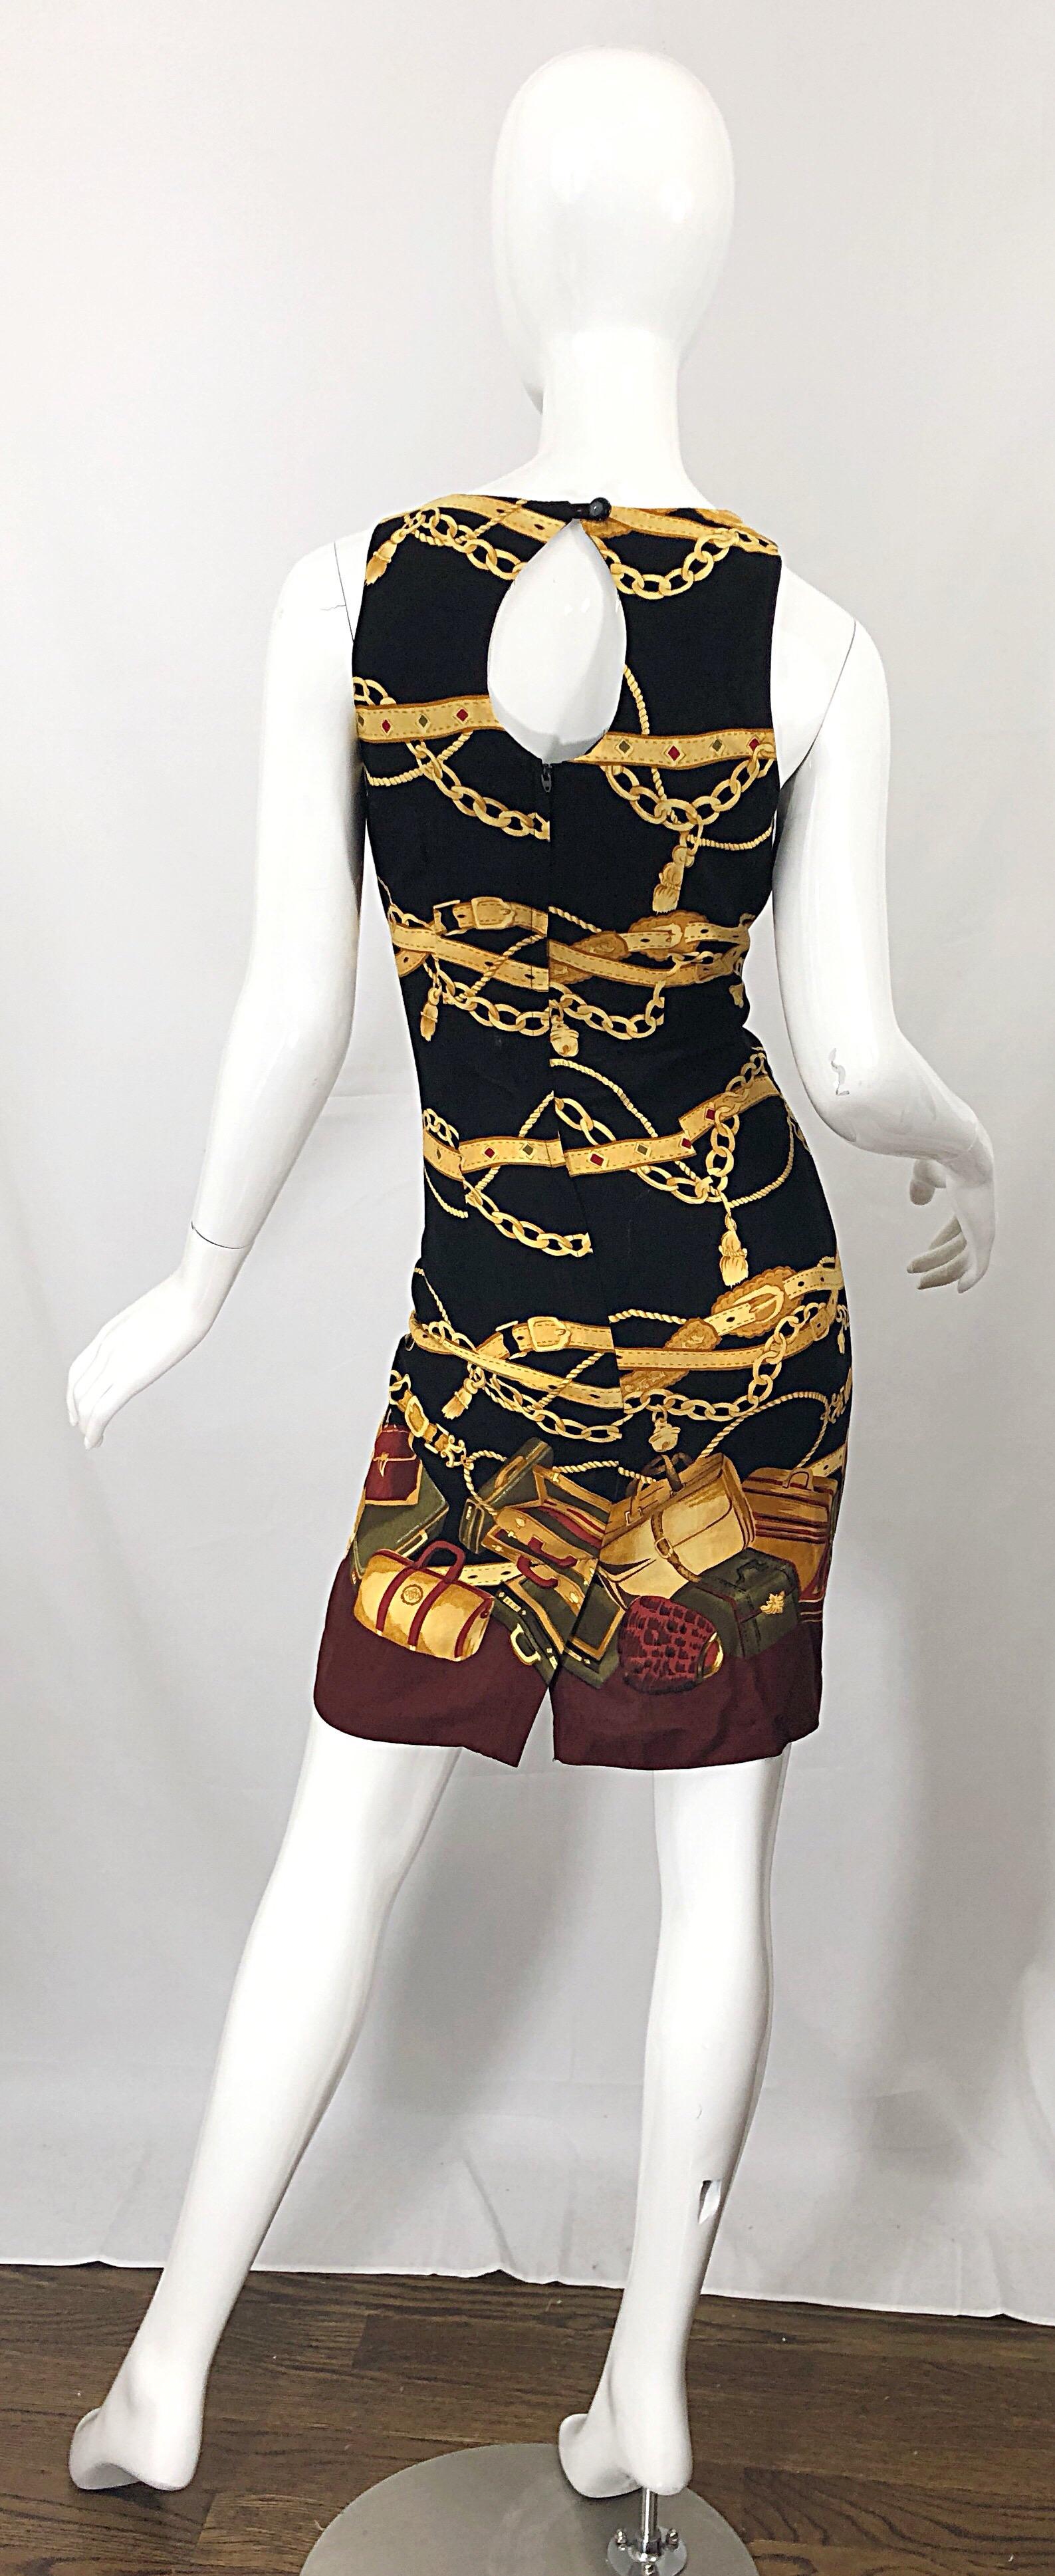 Amazing 1990s Size 6 / 8 novelty print chains + belts + bags open back rayon dress! Features a black background with gold chains and belts draped across. Purses / handbags printed at the hem with warm tones of maroon and browns. Hidden zipper up the